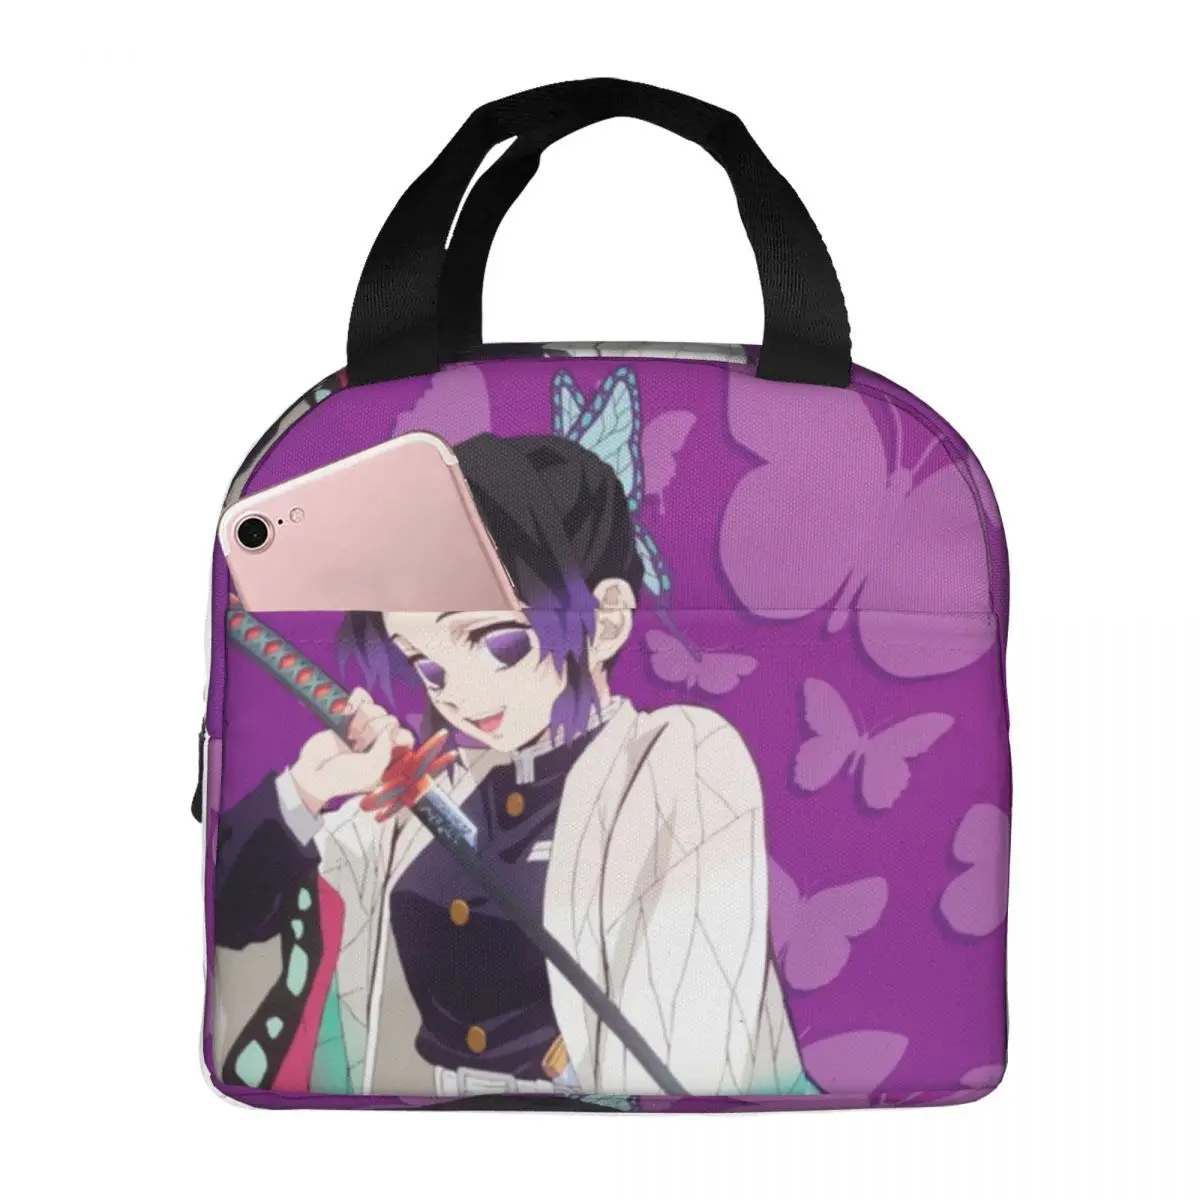 Kocho Shinobu Demon Slayer Lunch Bags Portable Insulated Cooler Anime Thermal Cold Food Picnic Travel Lunch Box for Women Kids